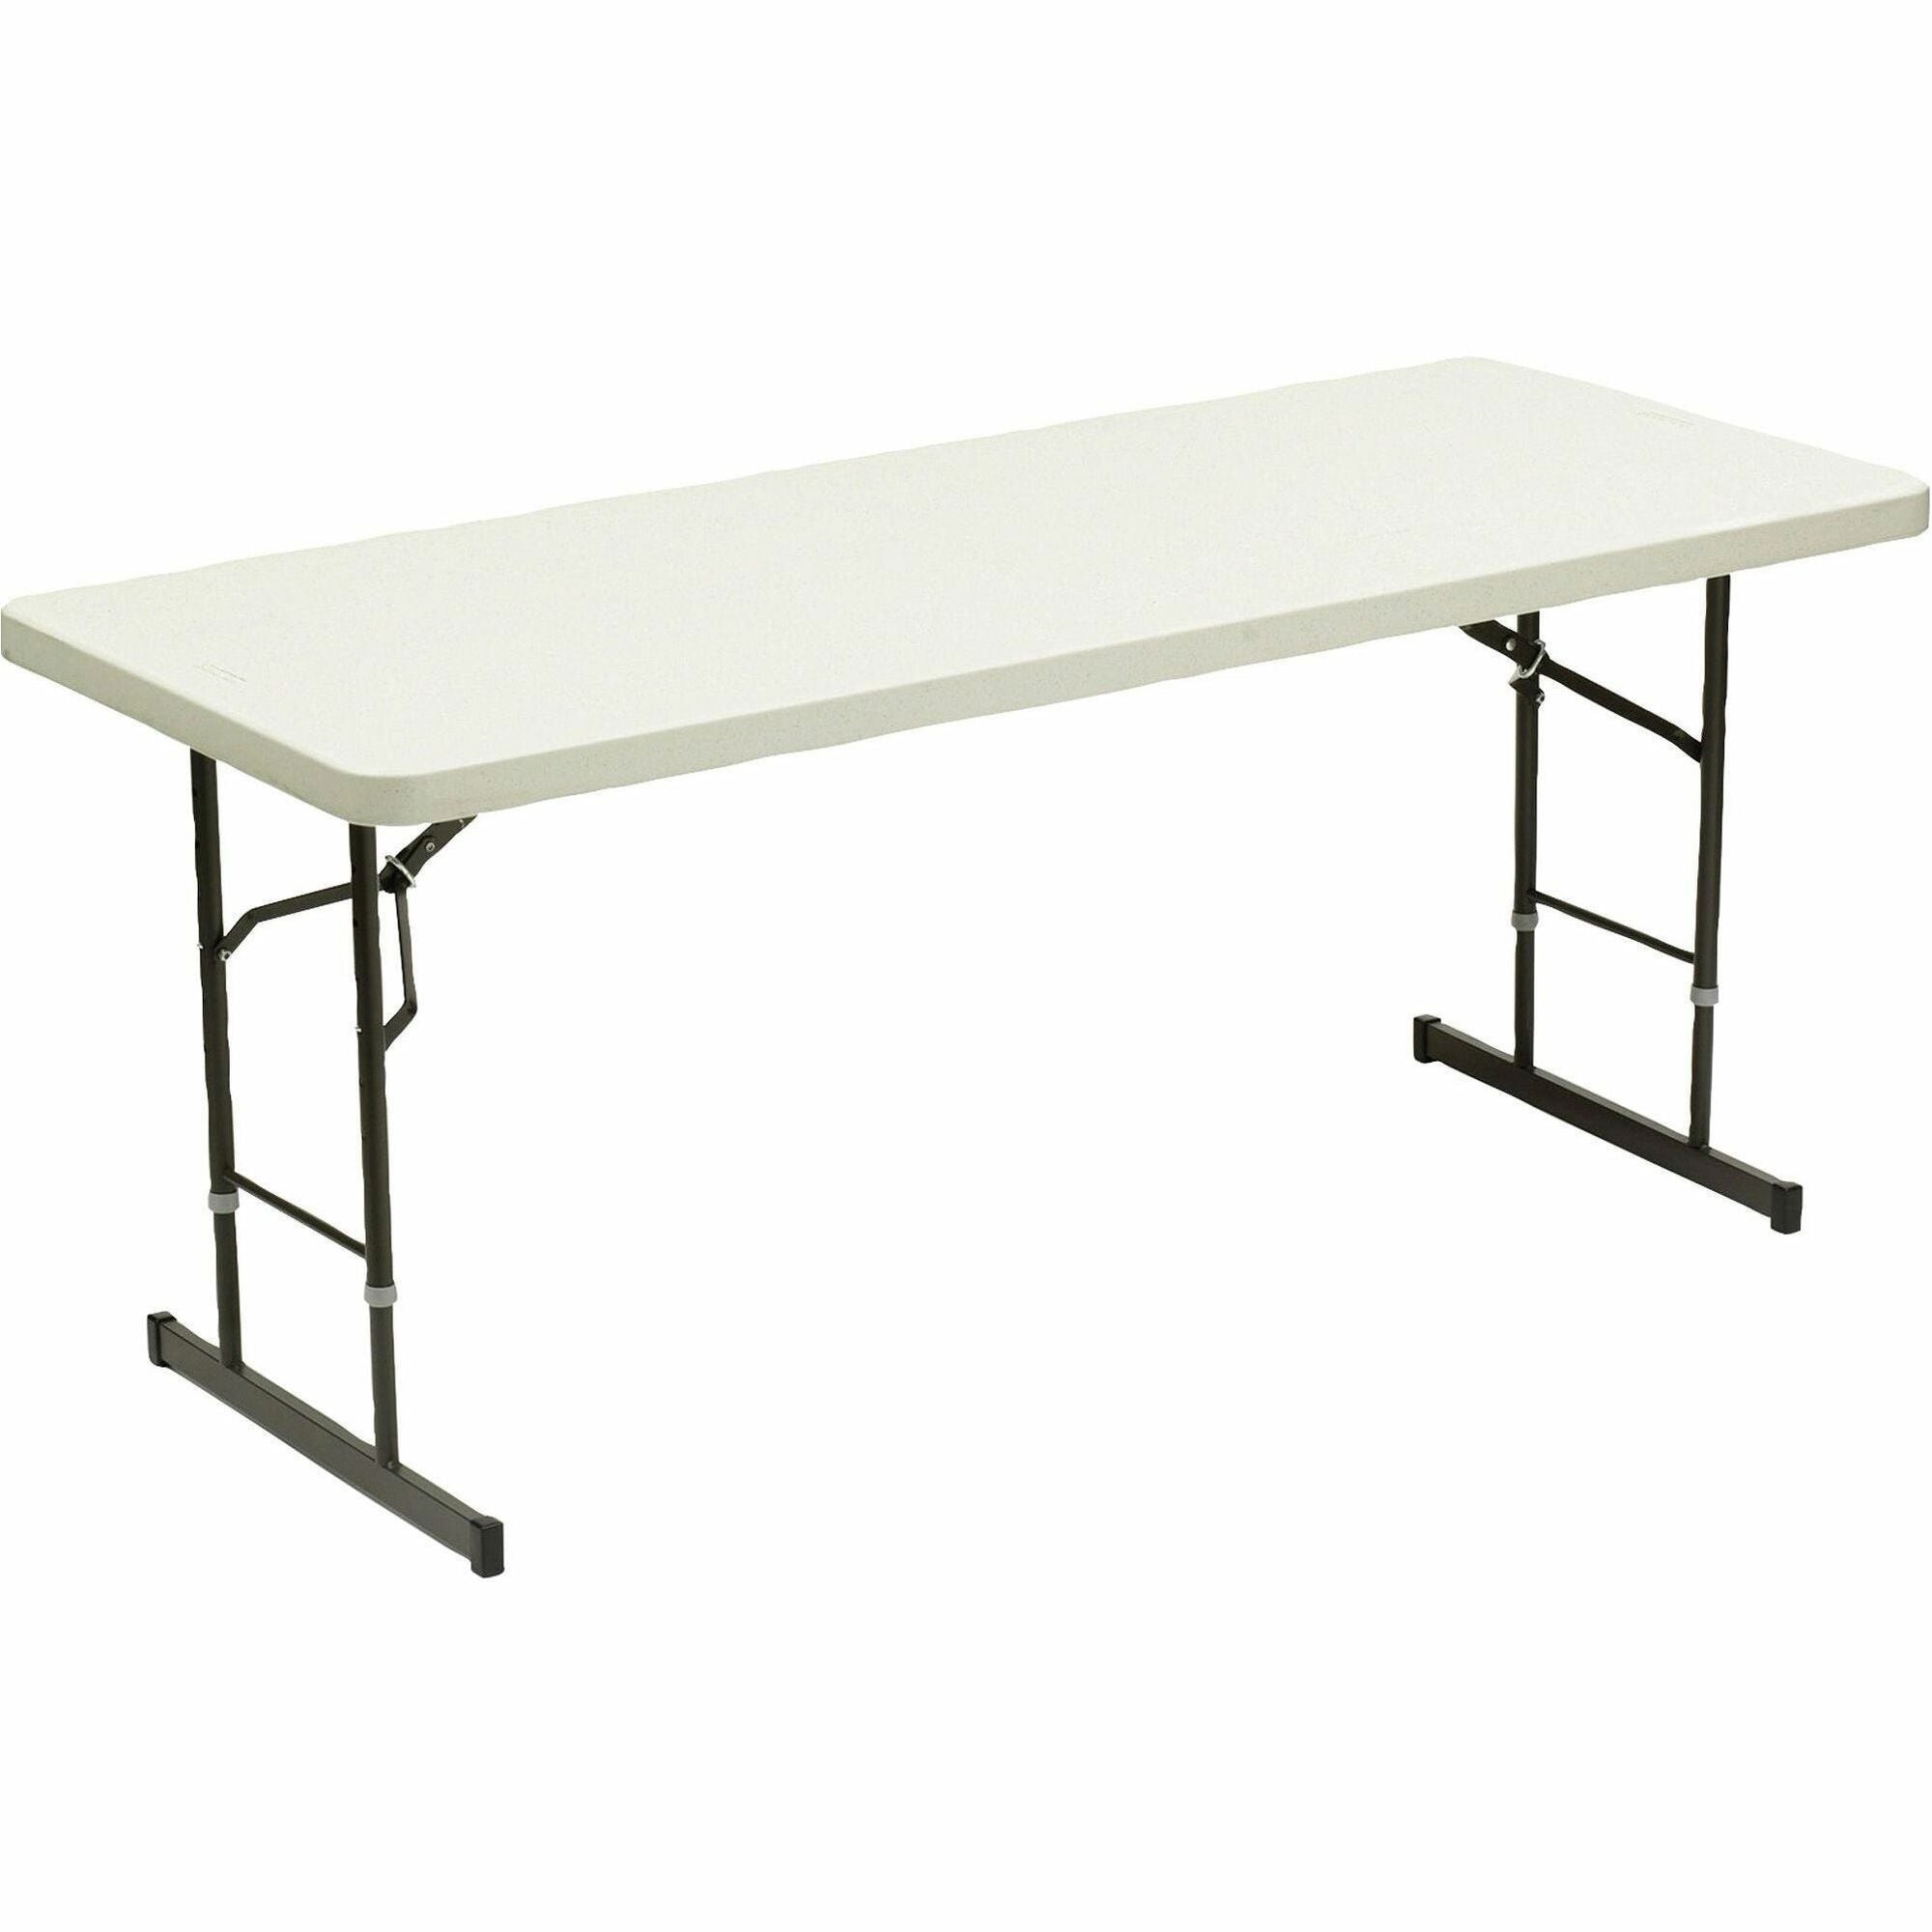 Iceberg IndestrucTable TOO 1200 Series Adjustable Folding Table - For - Table TopRectangle Top - 4 Legs - 600 lb Capacity - Adjustable Height - 25" to 29" Adjustment - 72" Table Top Length x 30" Table Top Width x 2" Table Top Thickness - 29" Height -